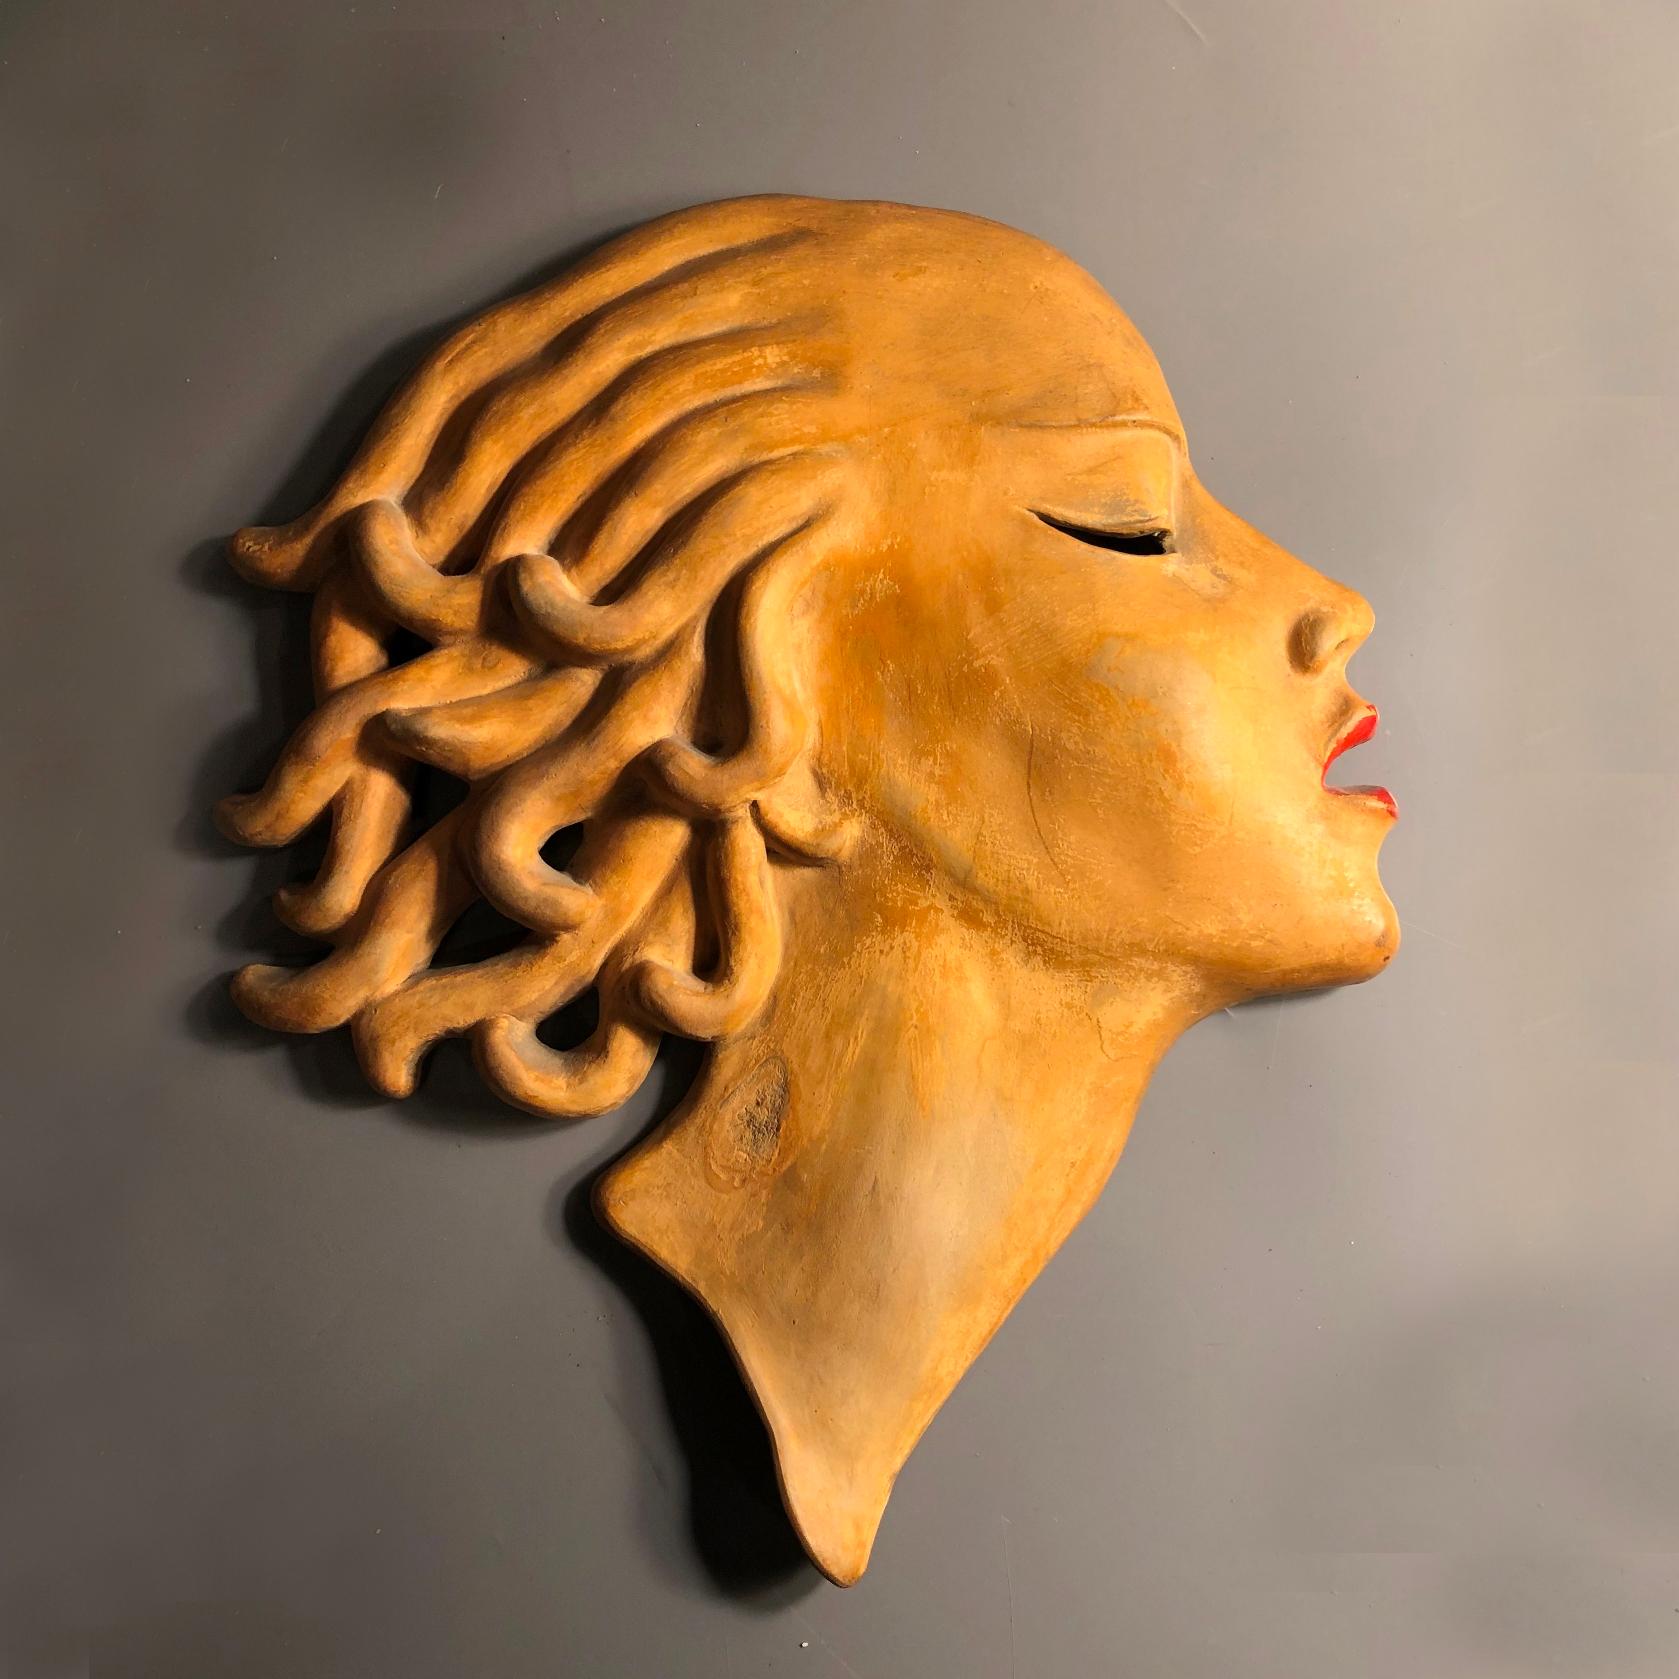 Art Deco period mask, terracotta cold painted.
Dr Rank Rezso was a ceramist working between the two world wars.
The most successful of his works were the wall masks.